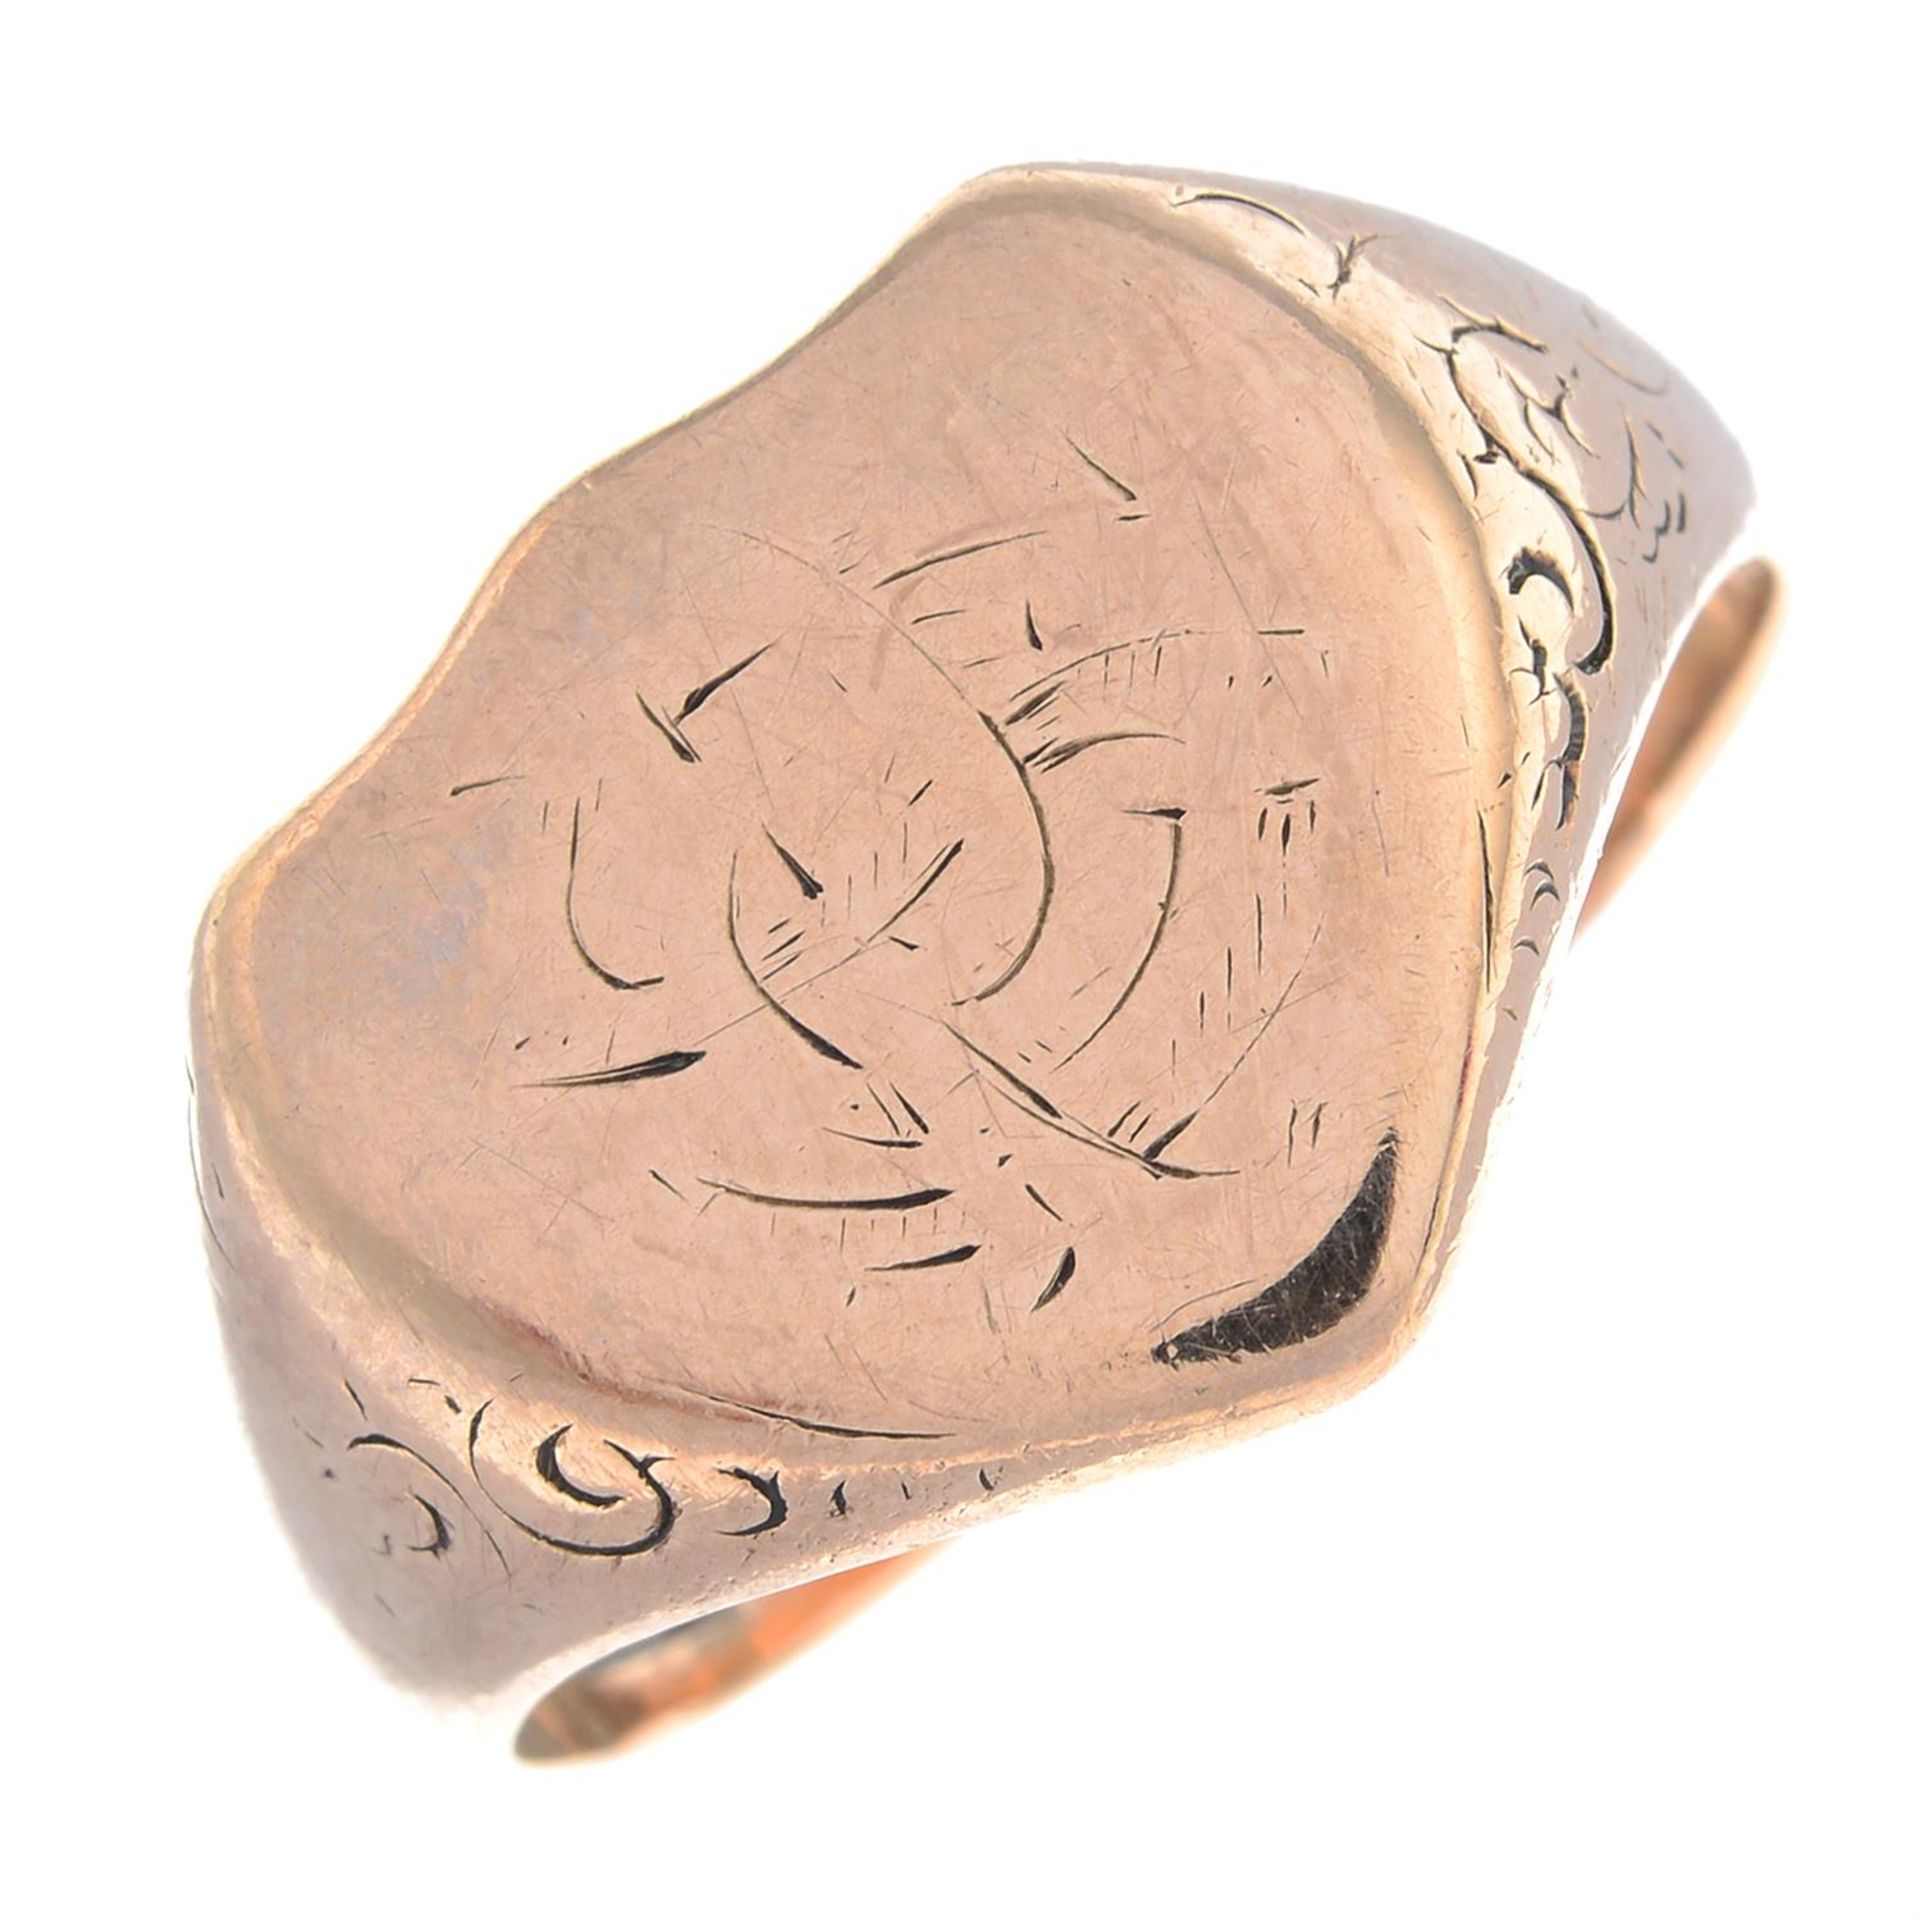 An early 20th century shield-shape signet ring, with scrolling sides.